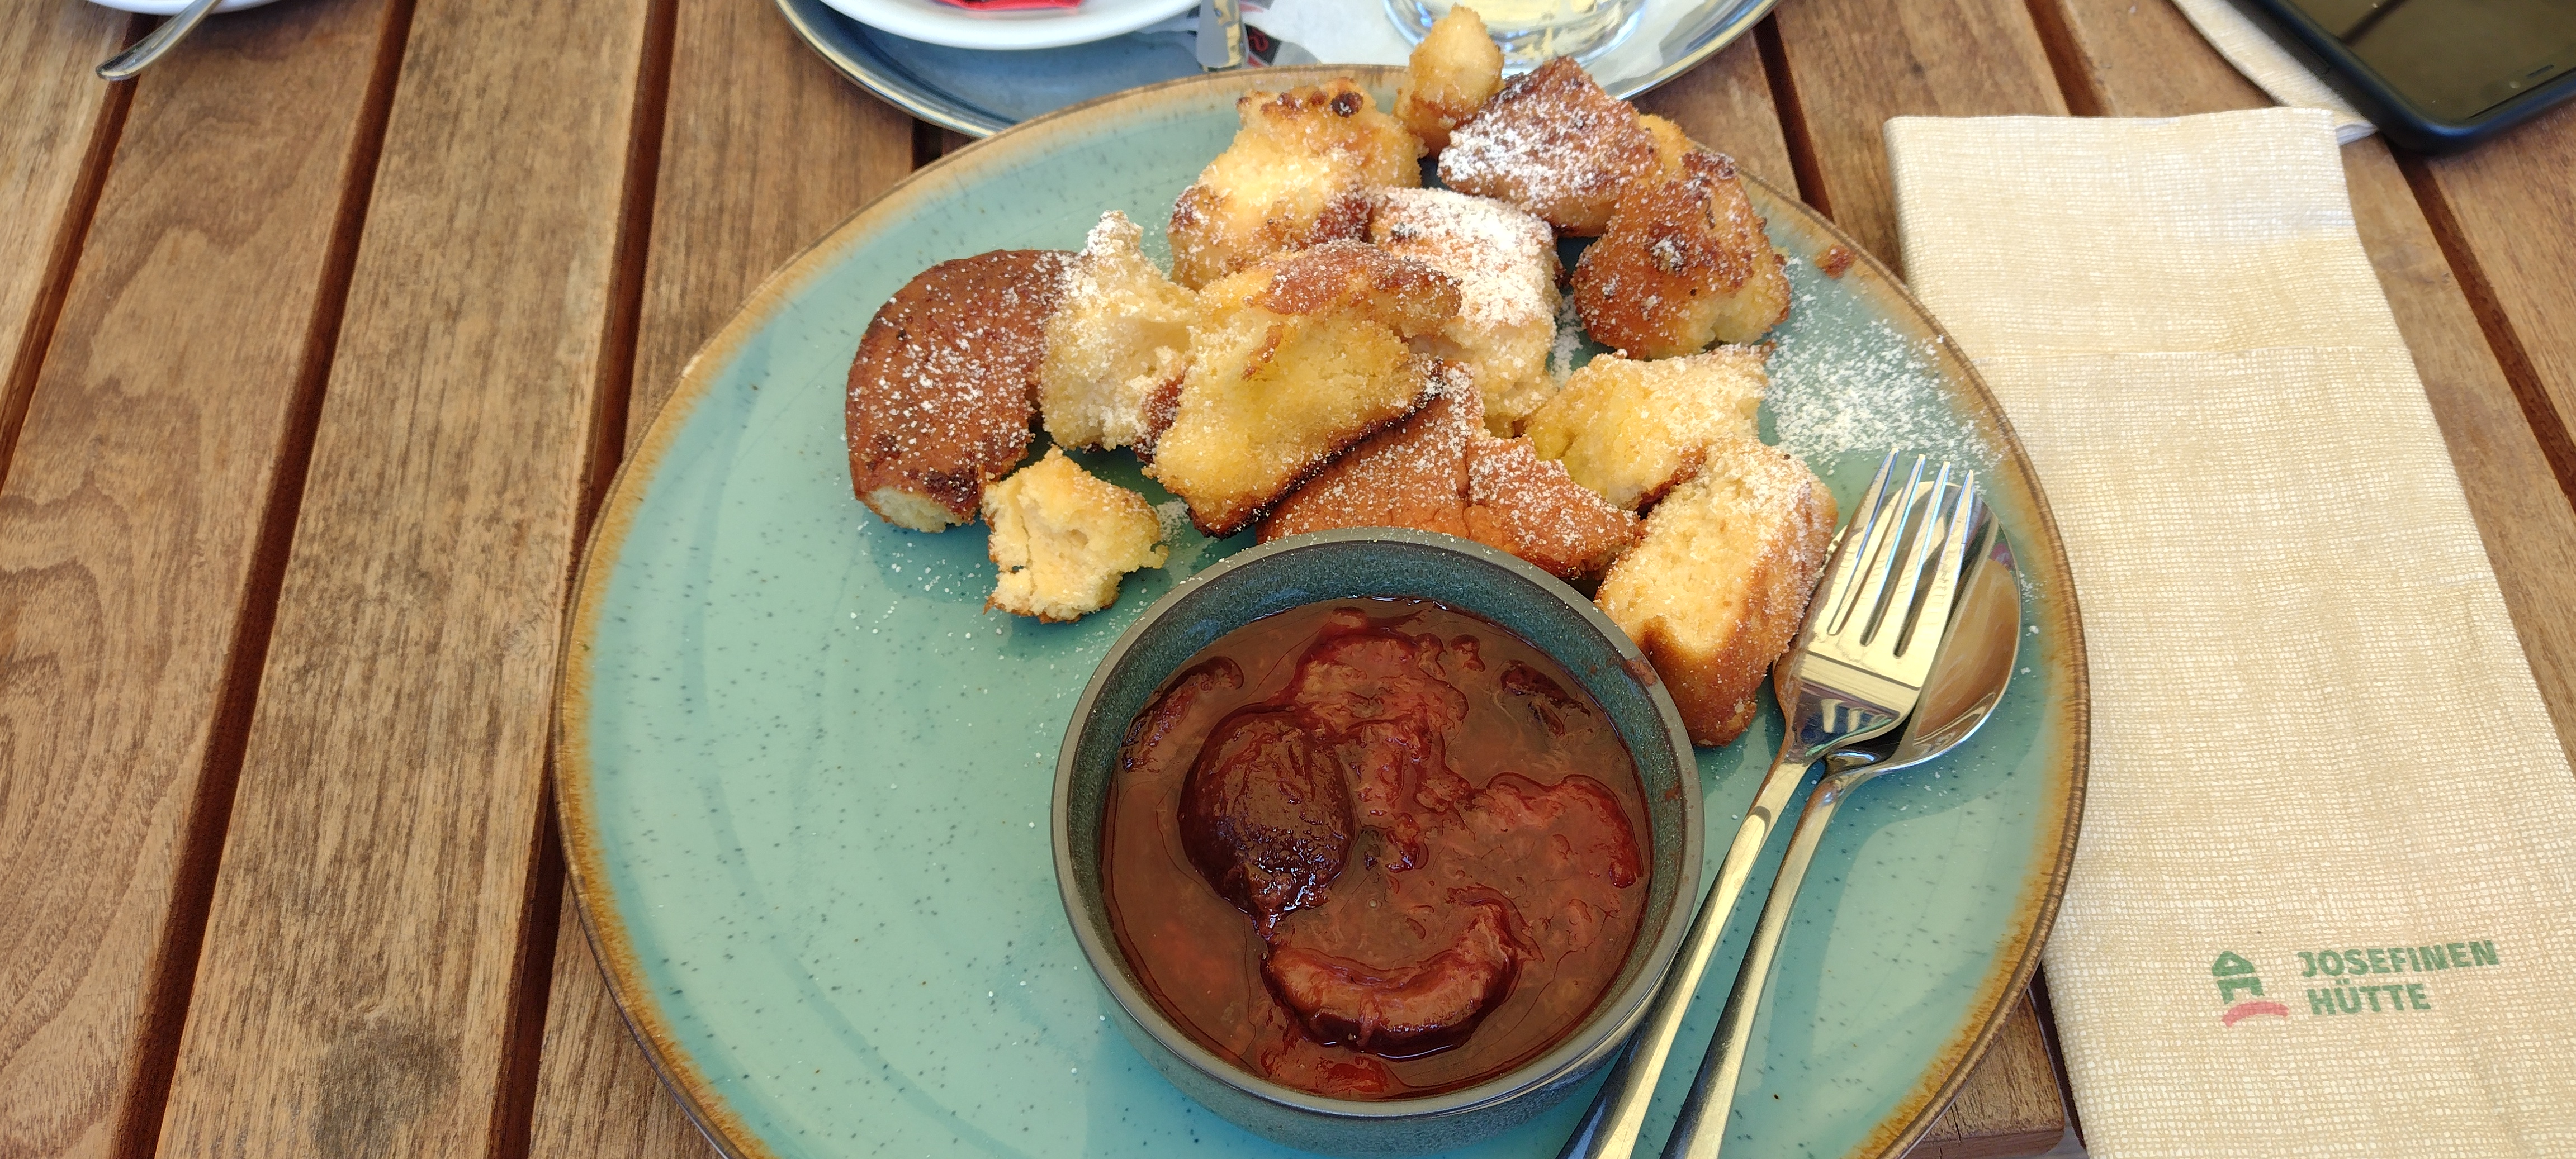 Kaiserschmarrn with plum sauce on a turquoise plate on top of a garden table